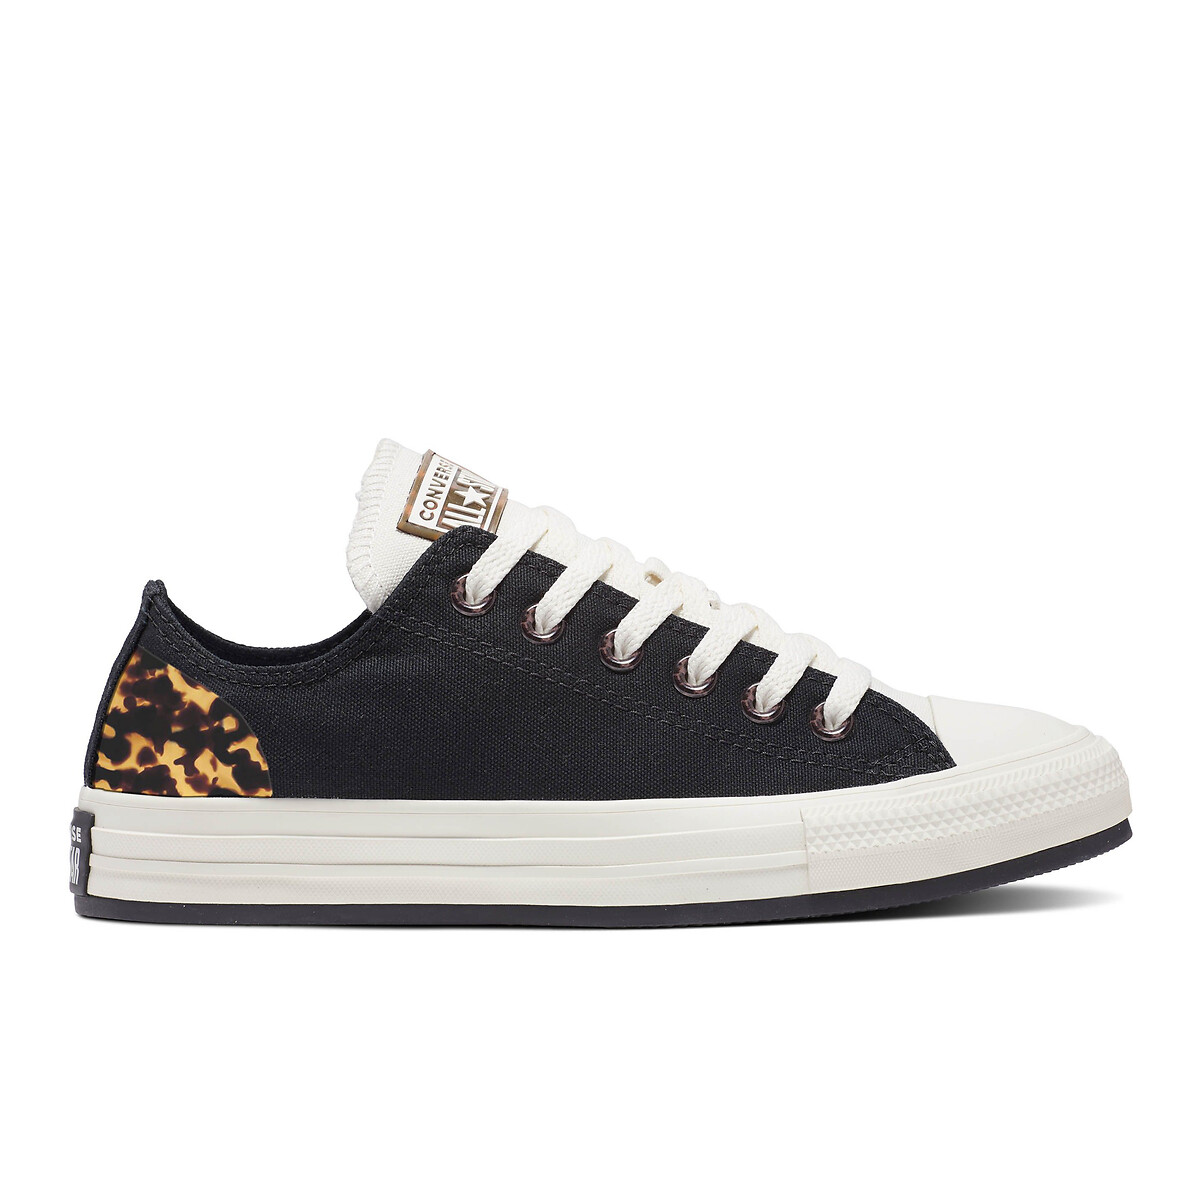 Image of Chuck Taylor All Star Ox Tortoise Canvas Trainers